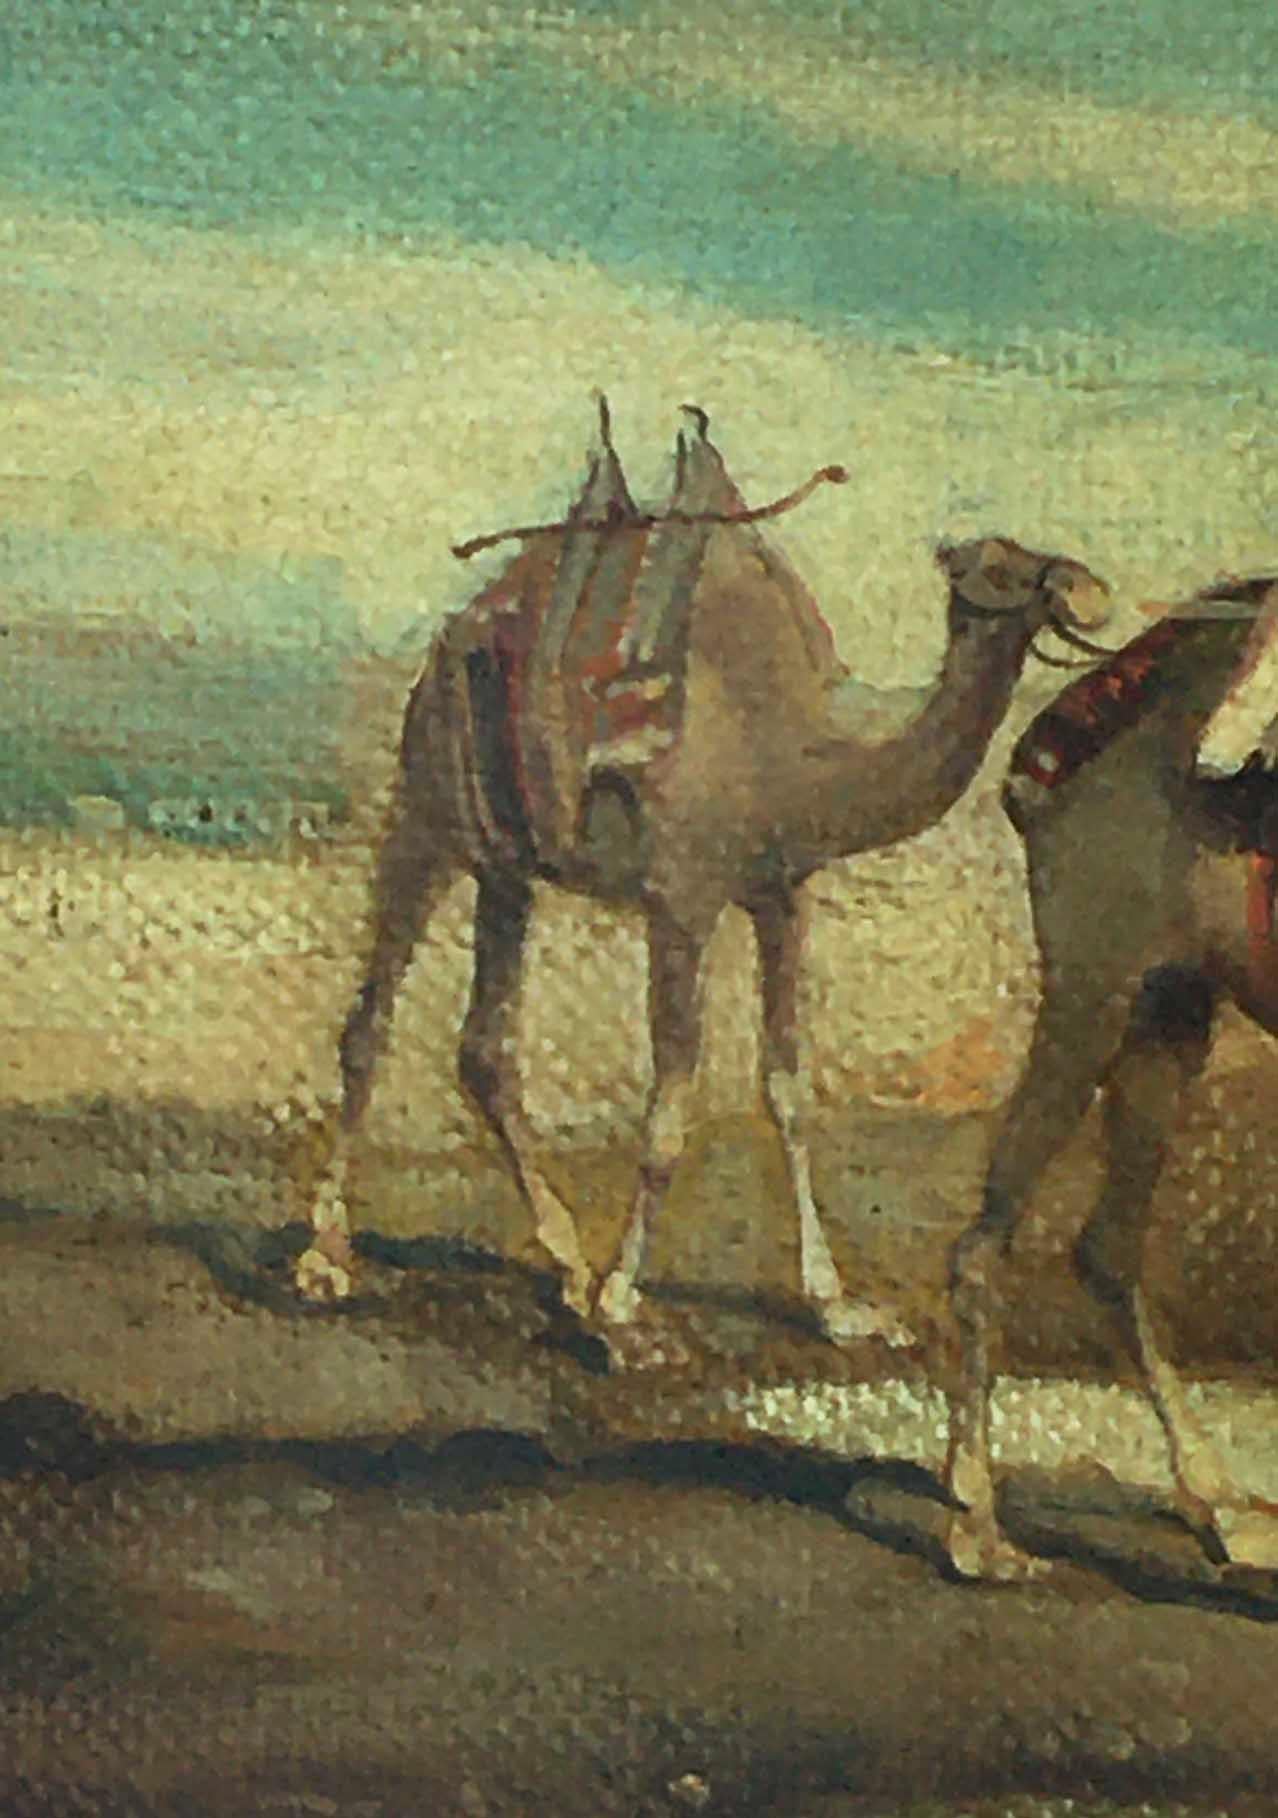 Arabian landscape - Francoise Vigneron Italia 2004 - Oil on canvas cm.20x55.
Frame available on request from our workshop.
In this beautiful oil on canvas Francoise Vigneron was inspired by the oriental and Arab landscapes of the French painter